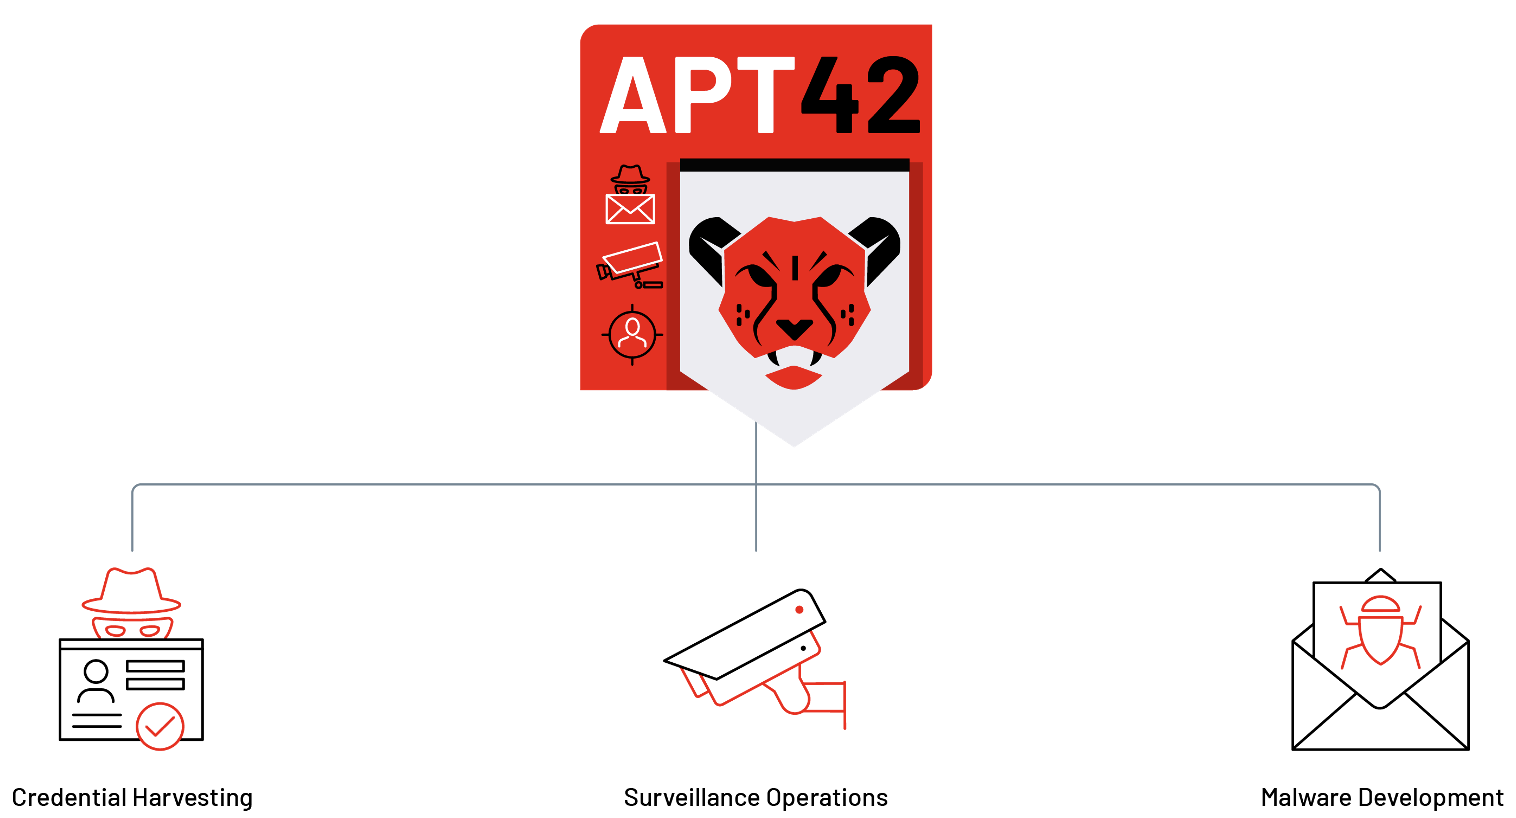 APT42 operations by category